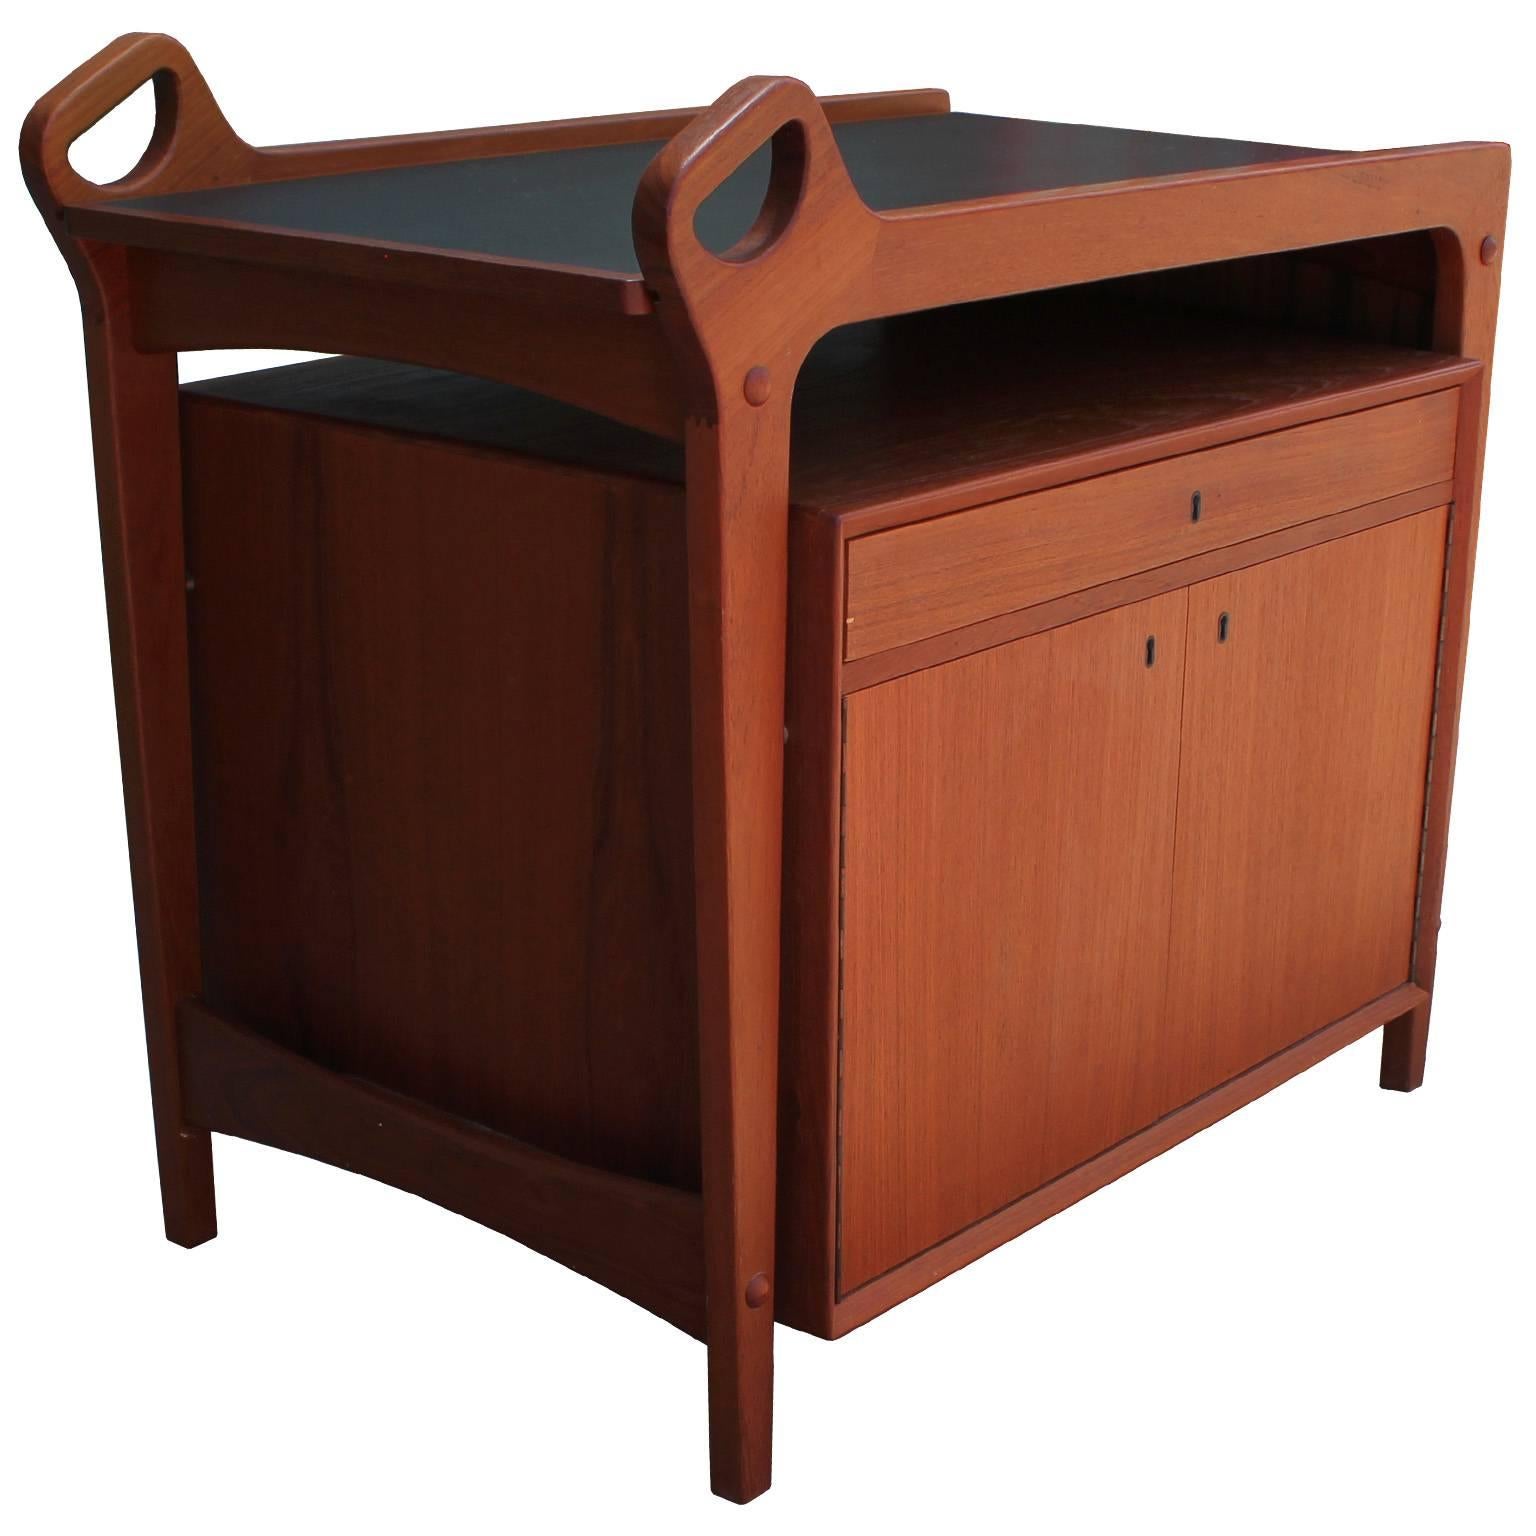 Sculptural Danish bar cart in teak with a black laminate surface. Cart has excellent lines with a wonderful use of negative space. Serving table top slides into place an extends. A single drawer is slotted and lined in green felt. Two cabinet doors